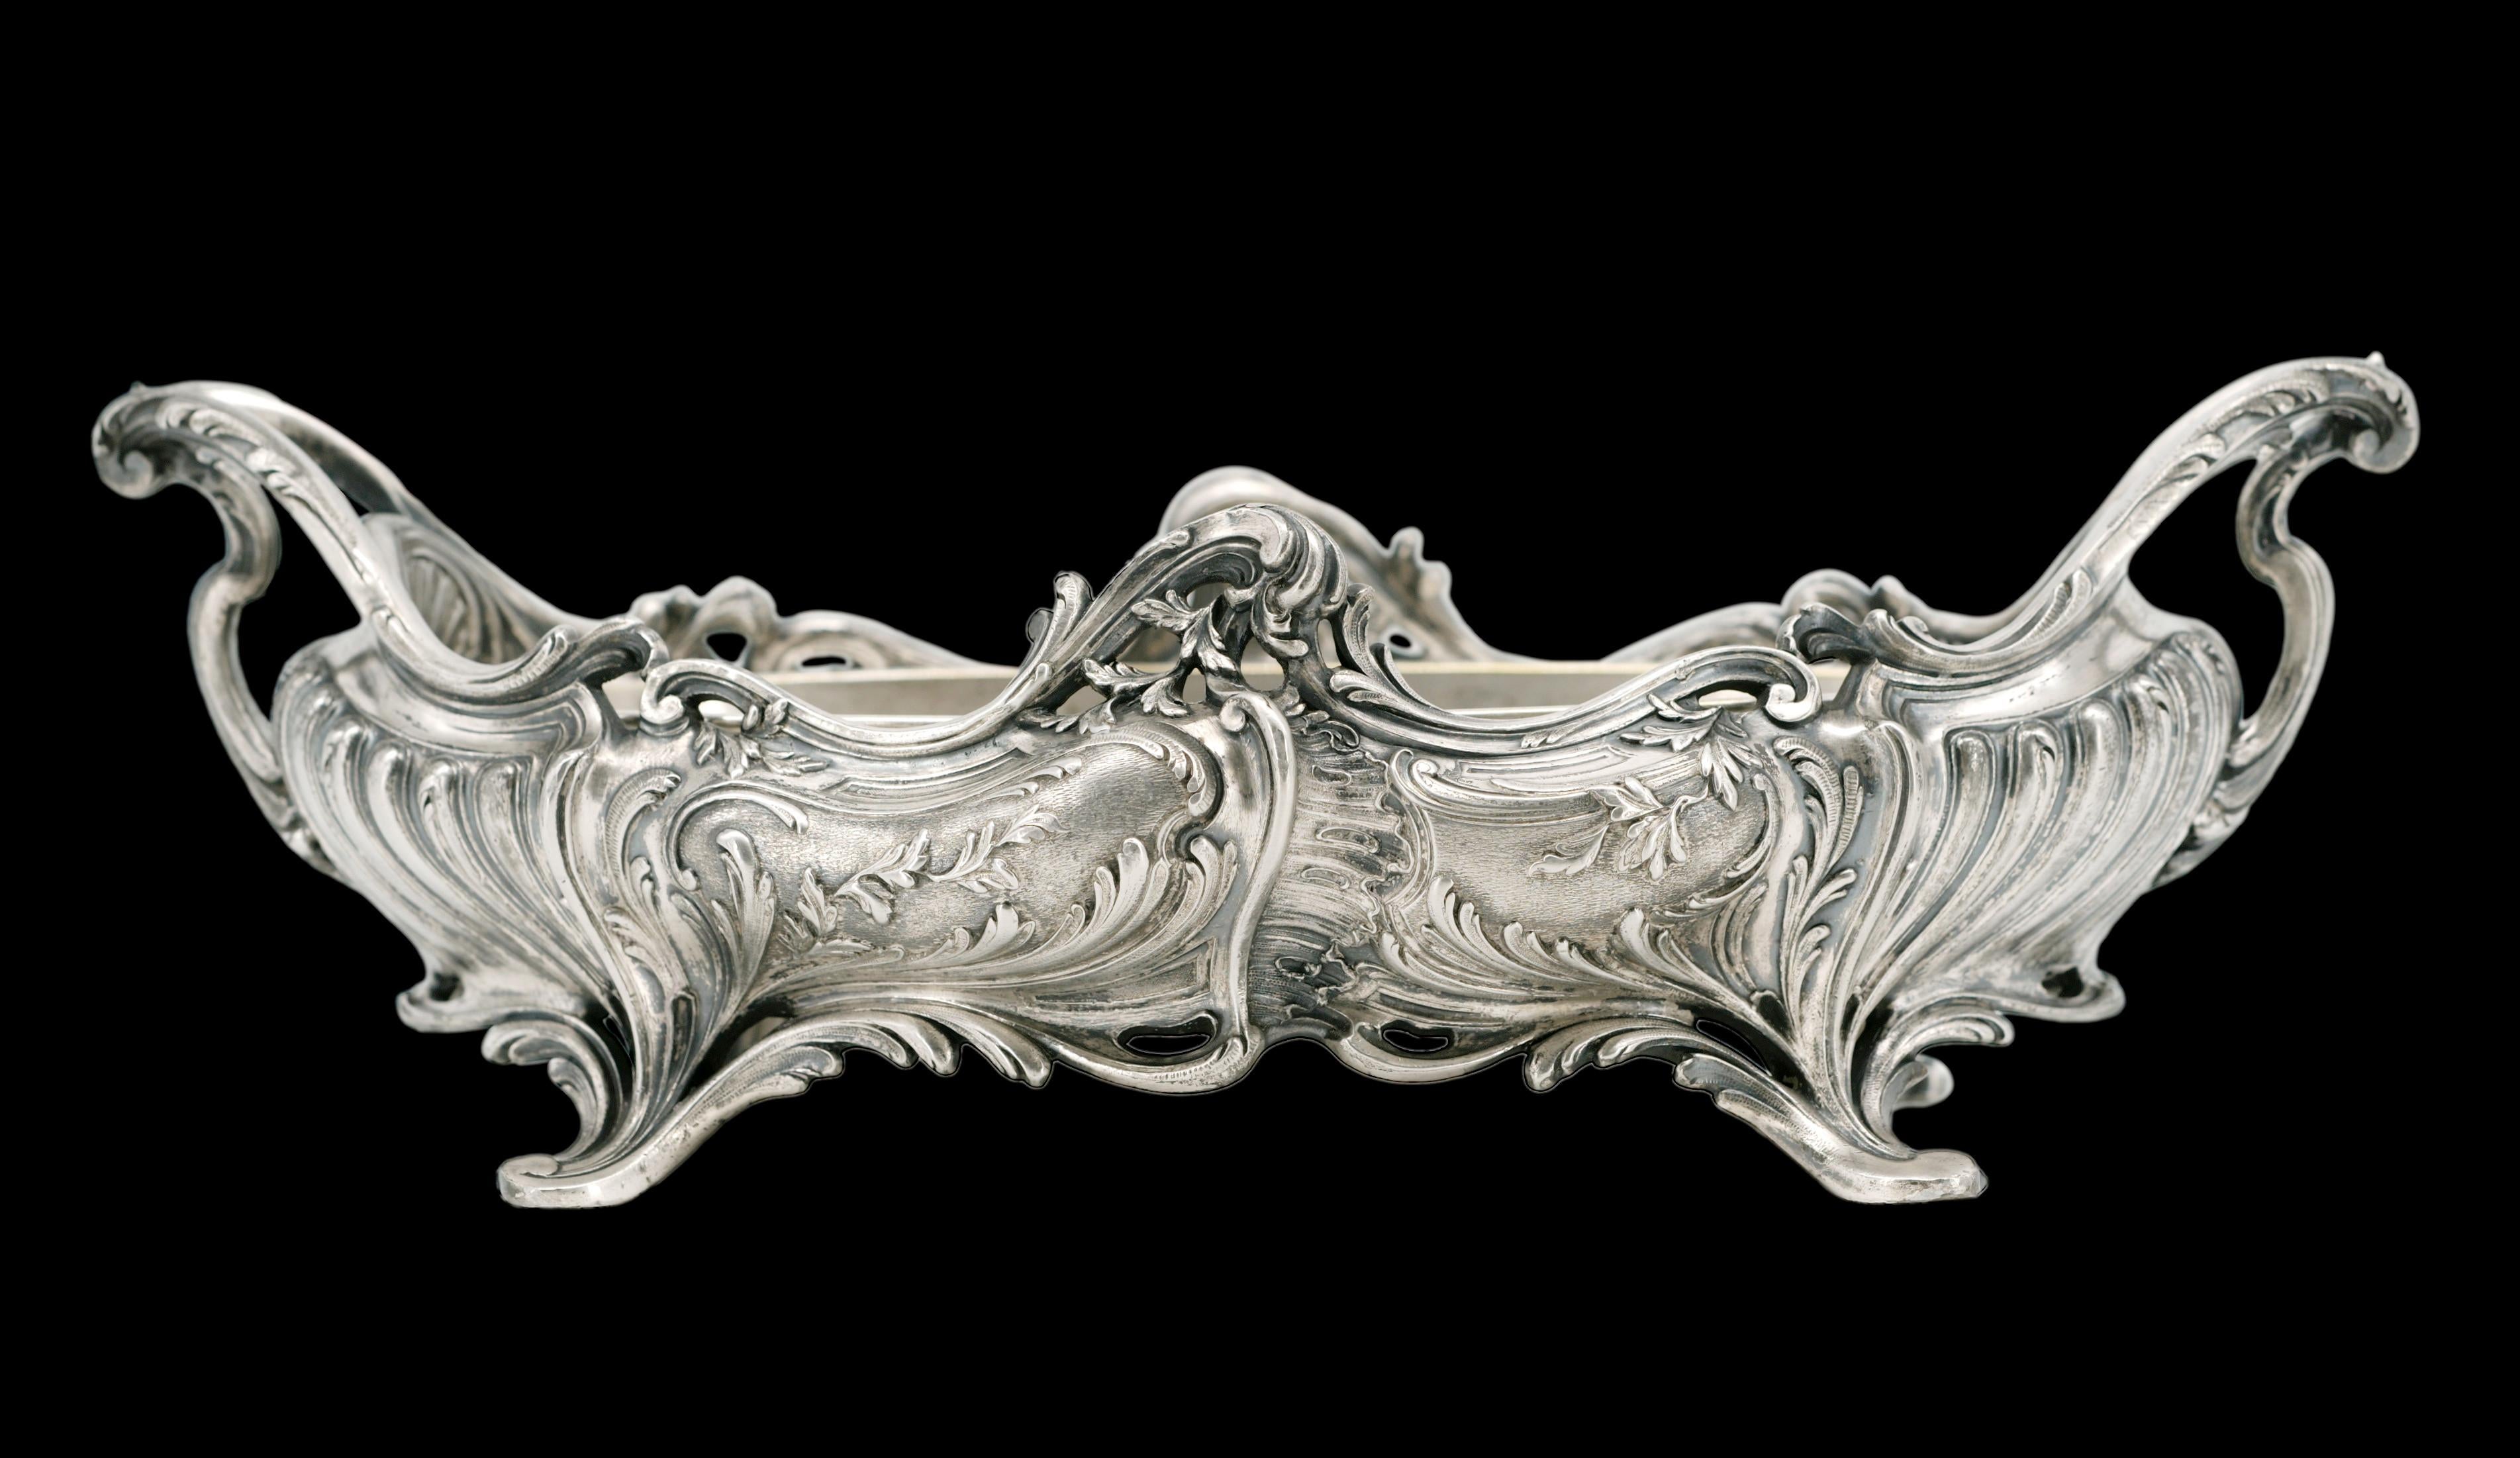 French Art Nouveau centerpiece planter by Victor SAGLIER, 12 rue d'Enghien , Paris, France, ca.1890. Silverplate metal. Black patina in the hollows to accentuate the reliefs. Height : 5.3